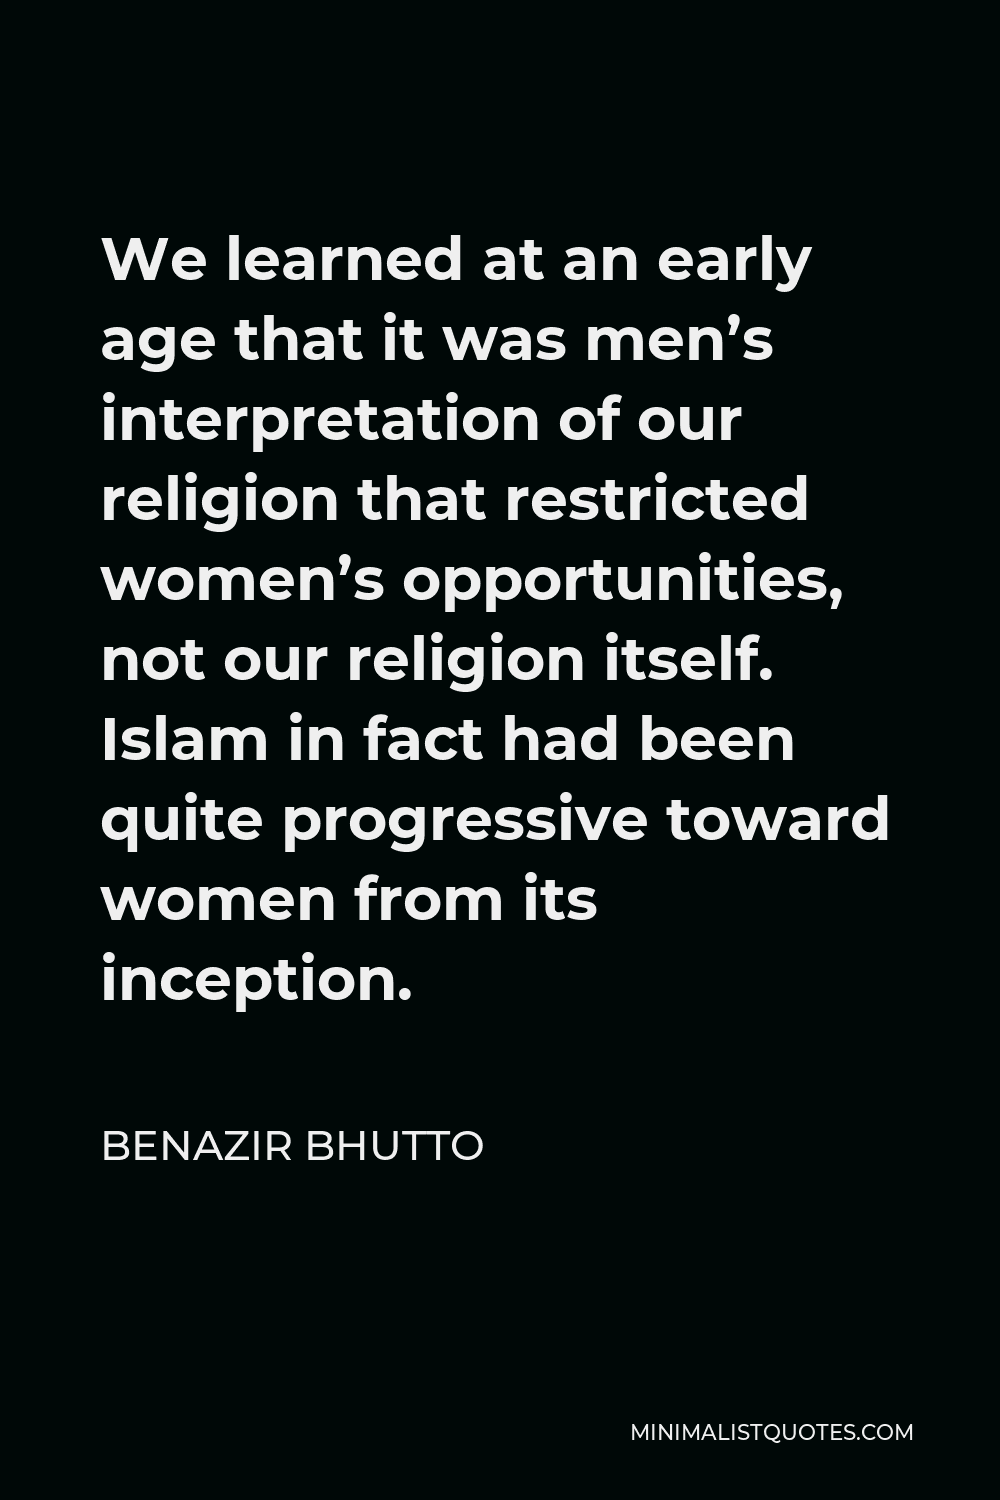 Benazir Bhutto Quote - We learned at an early age that it was men’s interpretation of our religion that restricted women’s opportunities, not our religion itself. Islam in fact had been quite progressive toward women from its inception.